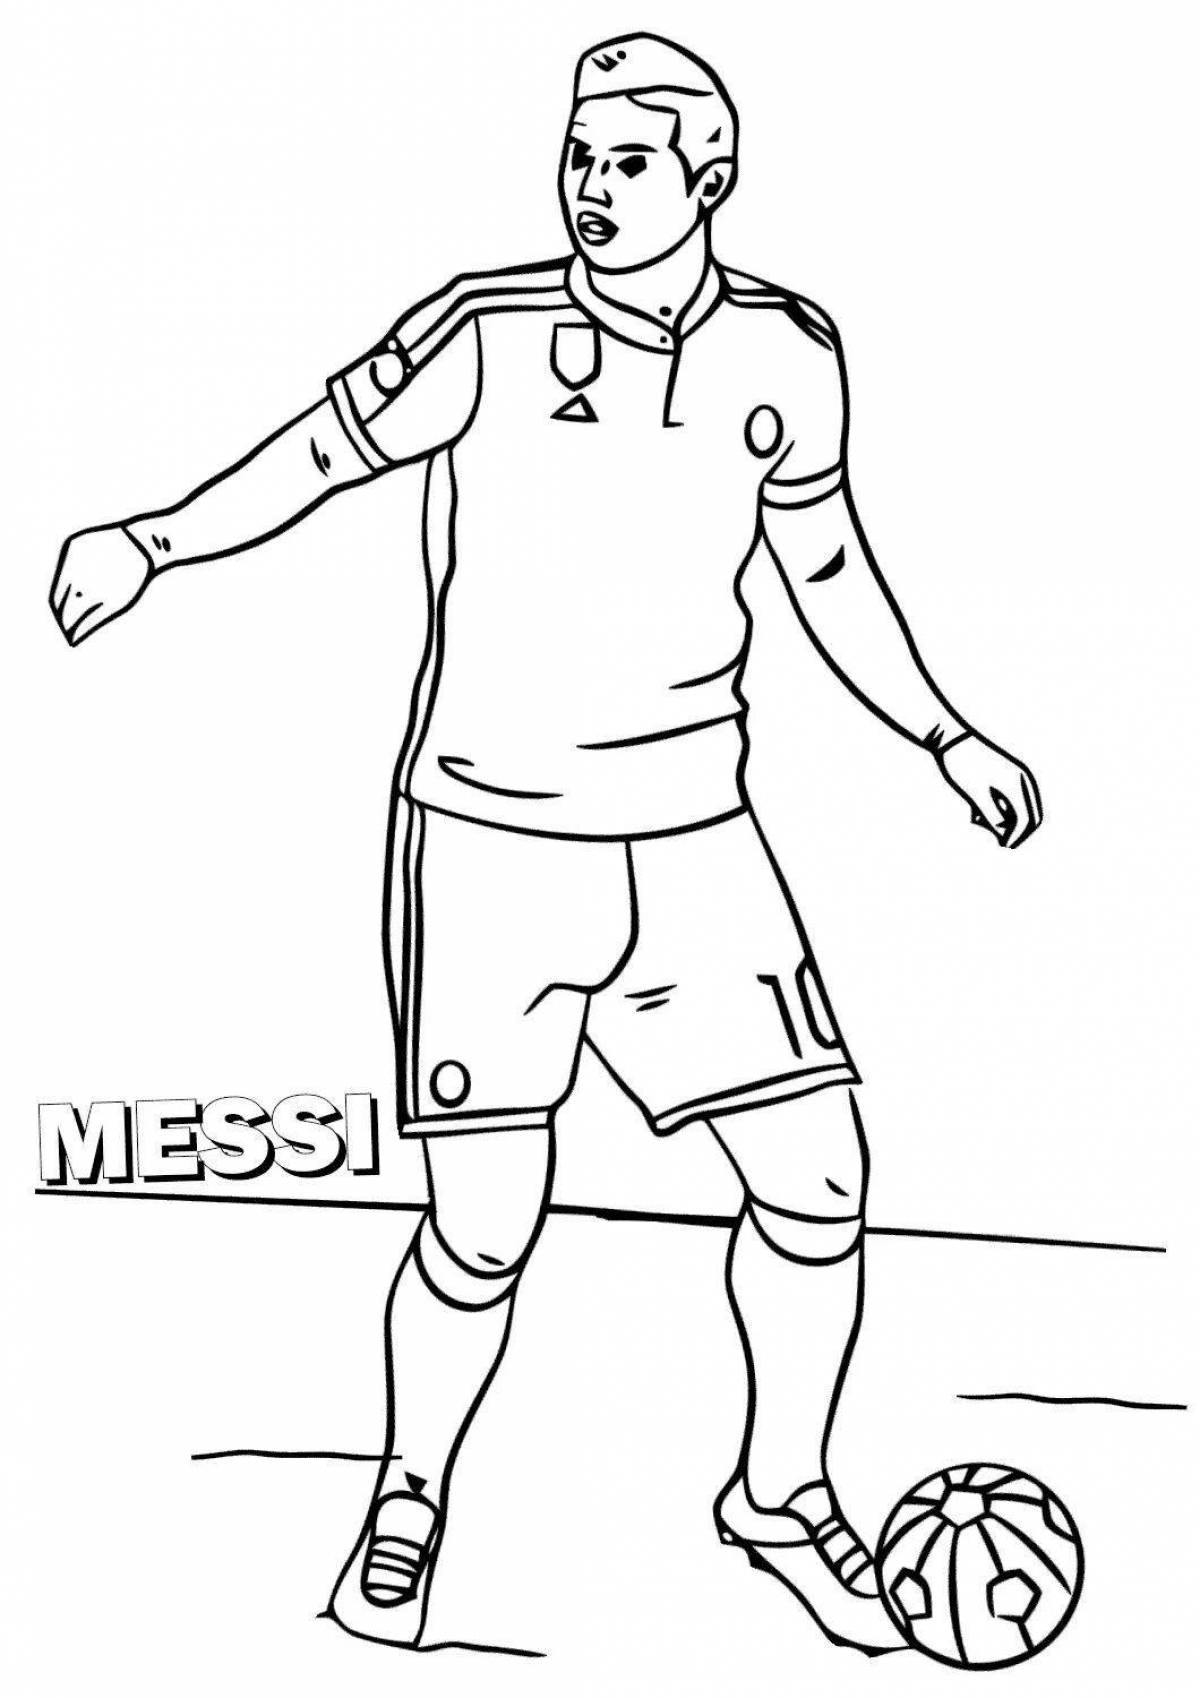 Coloring messi for kids